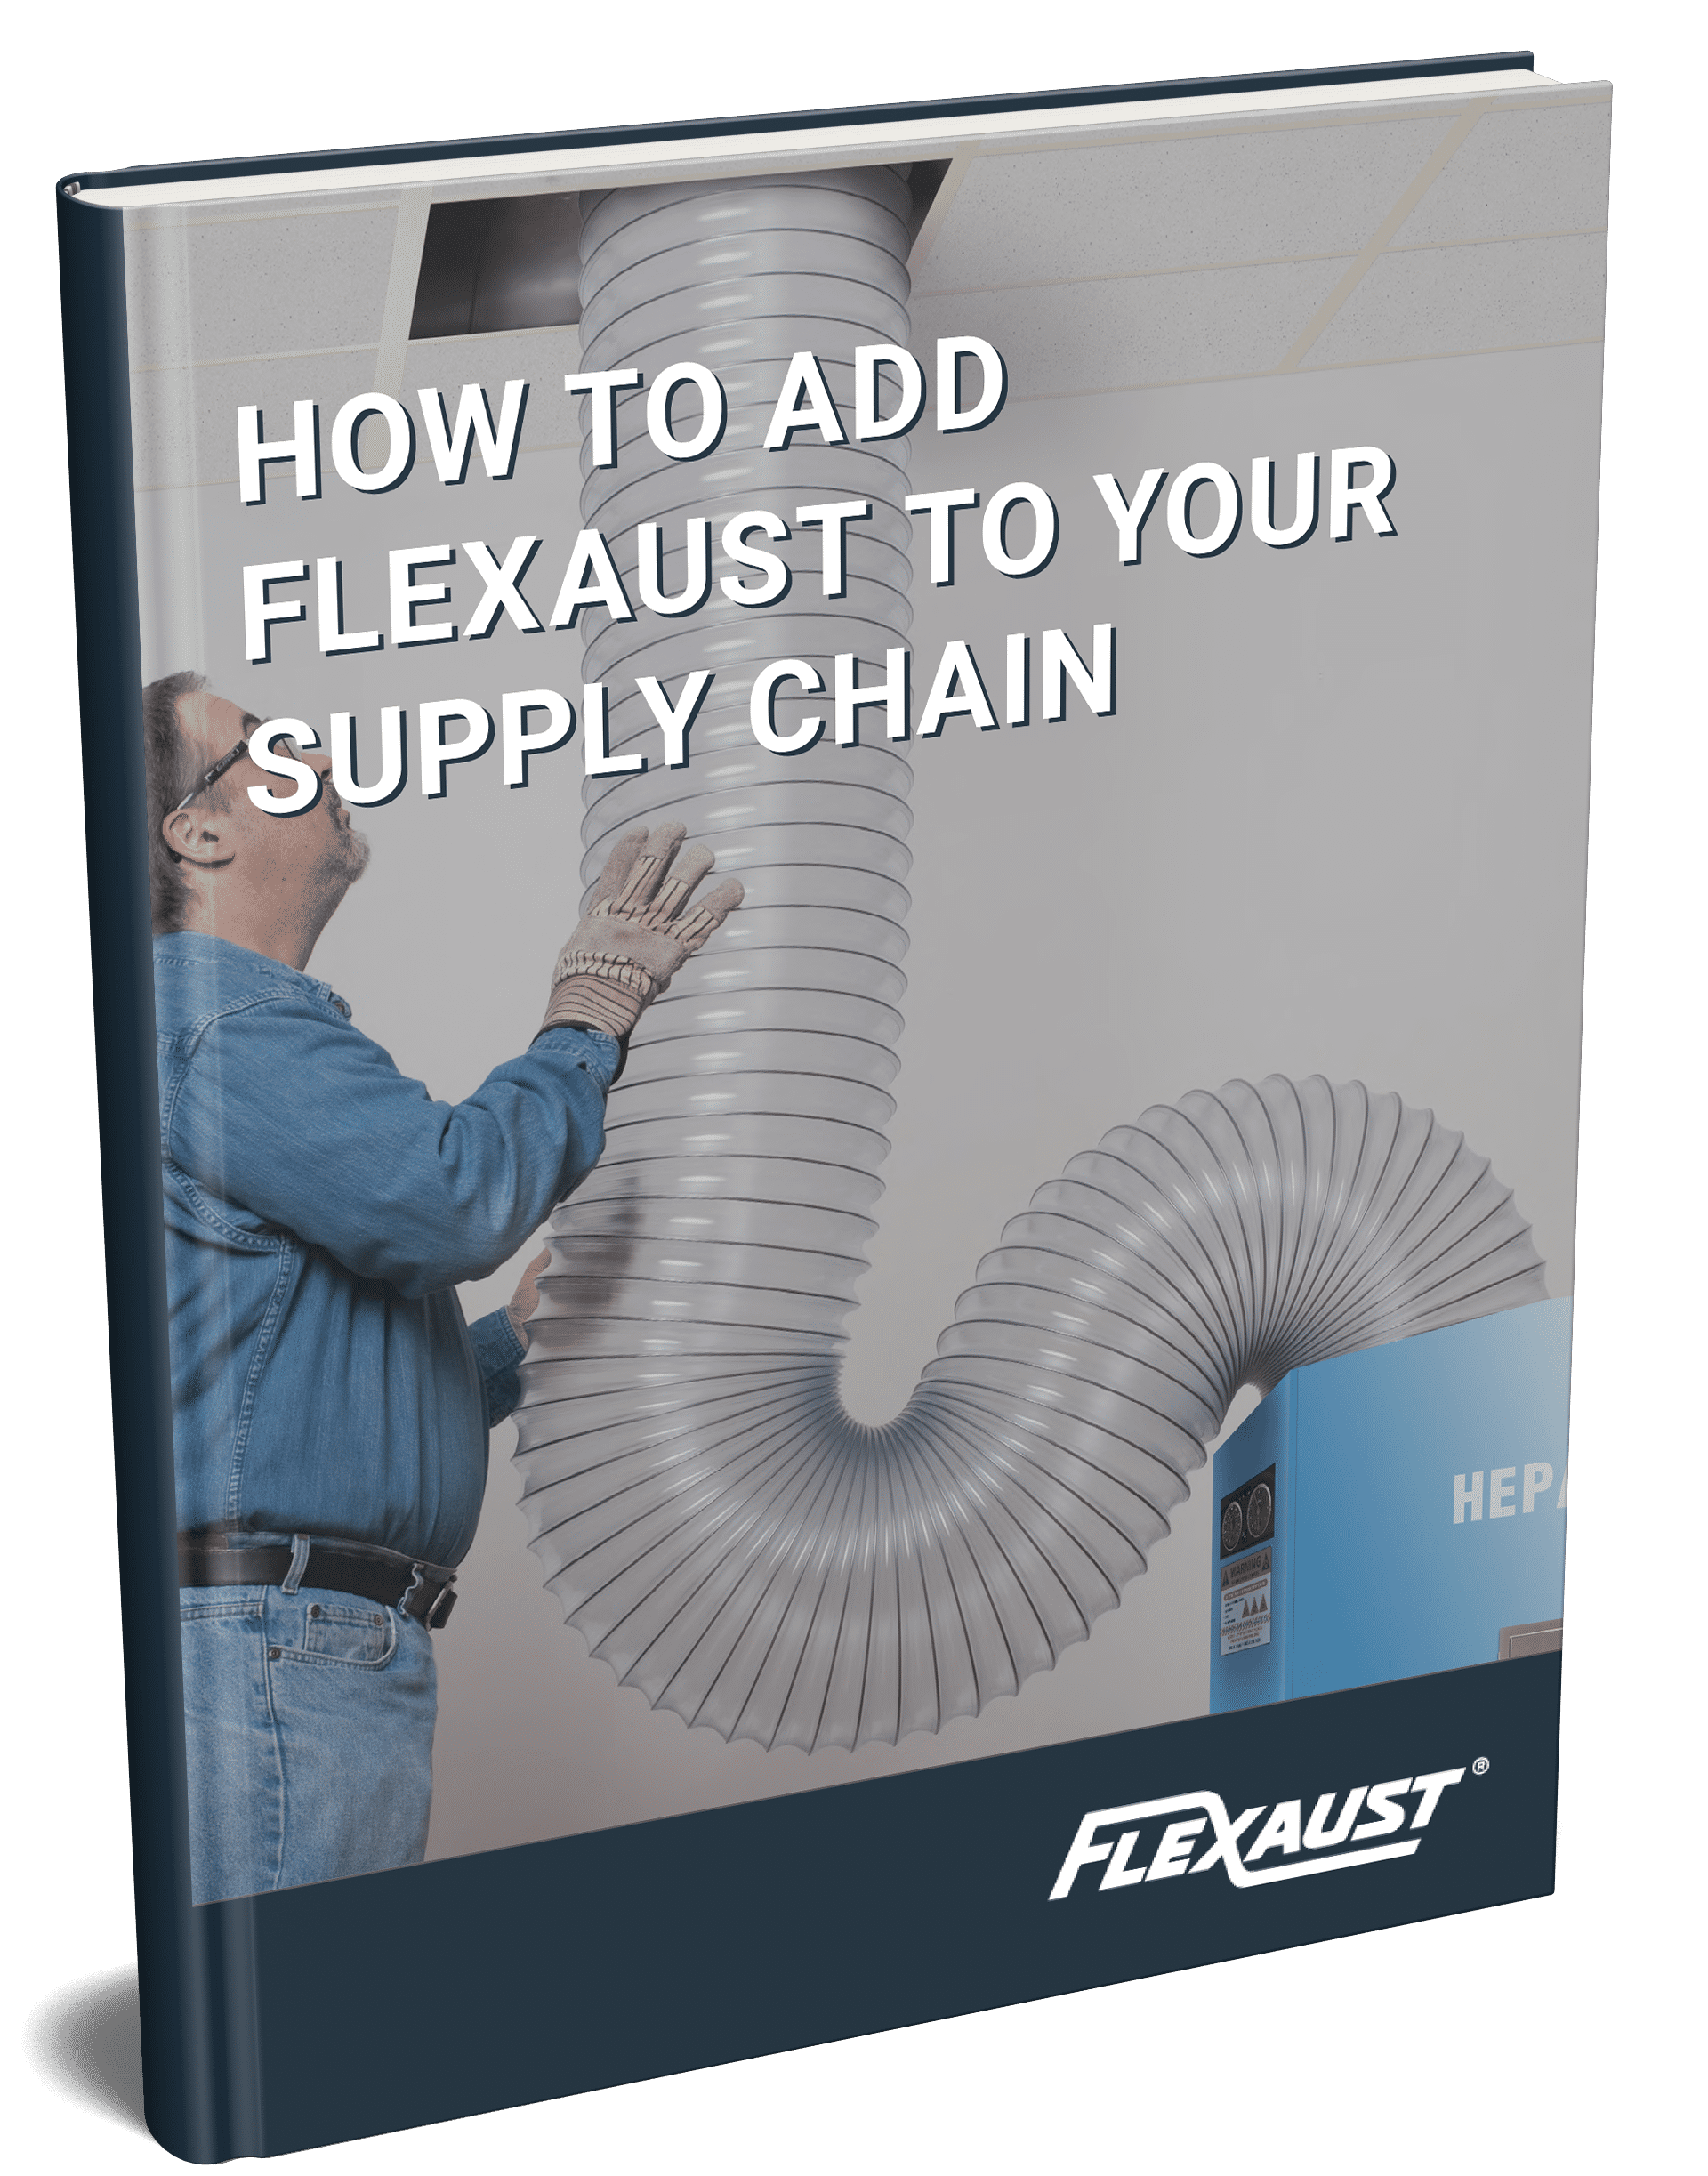 How to Add Flexaust to Your Supply Chain.